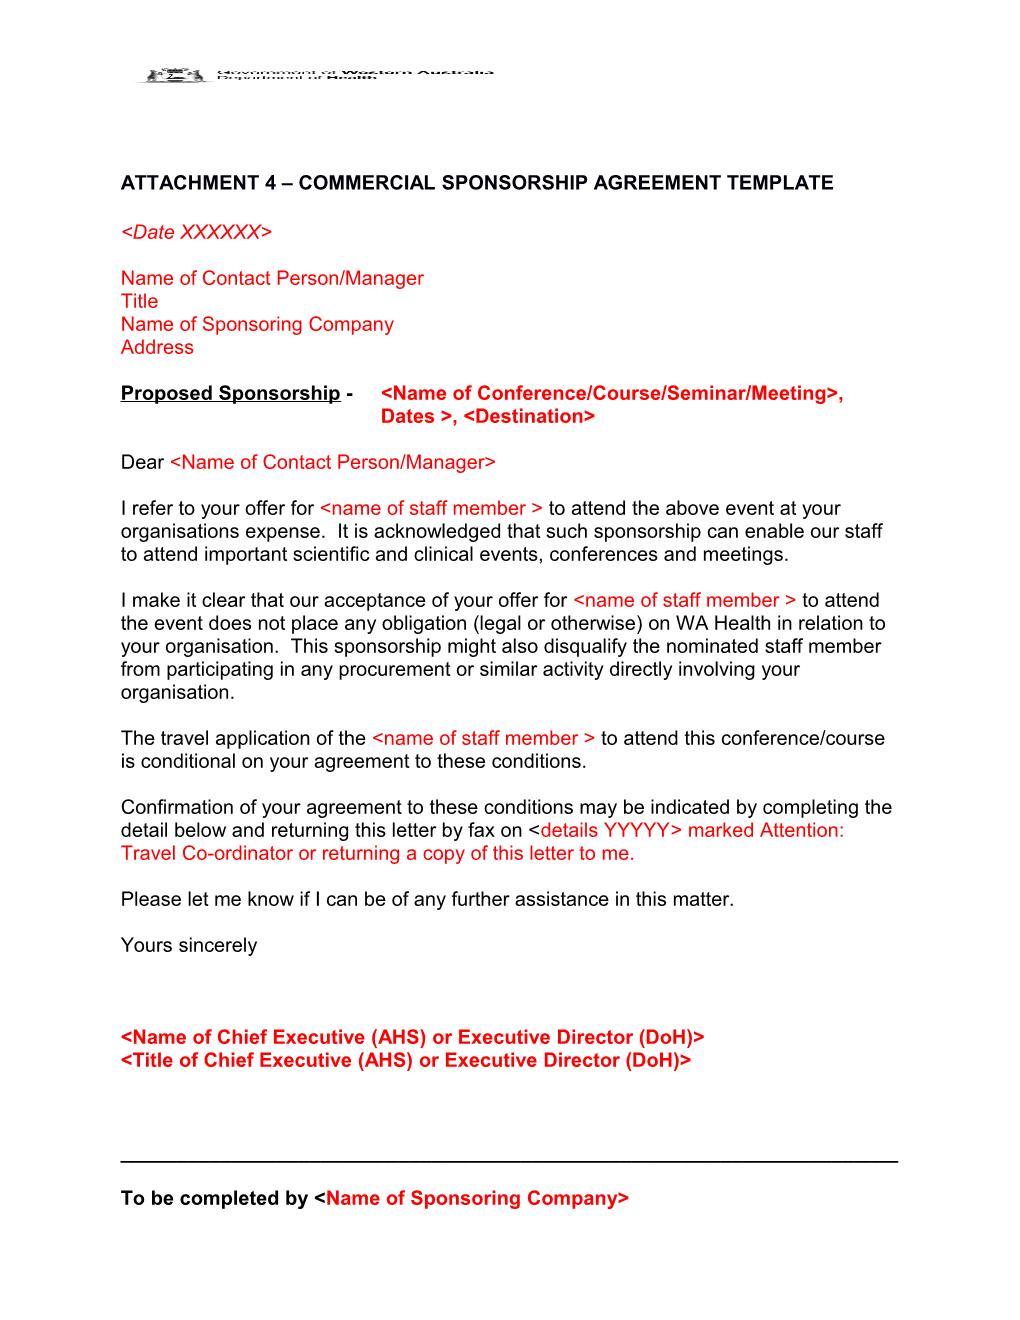 Attachment 4 Commercial Sponsorship Agreement Template